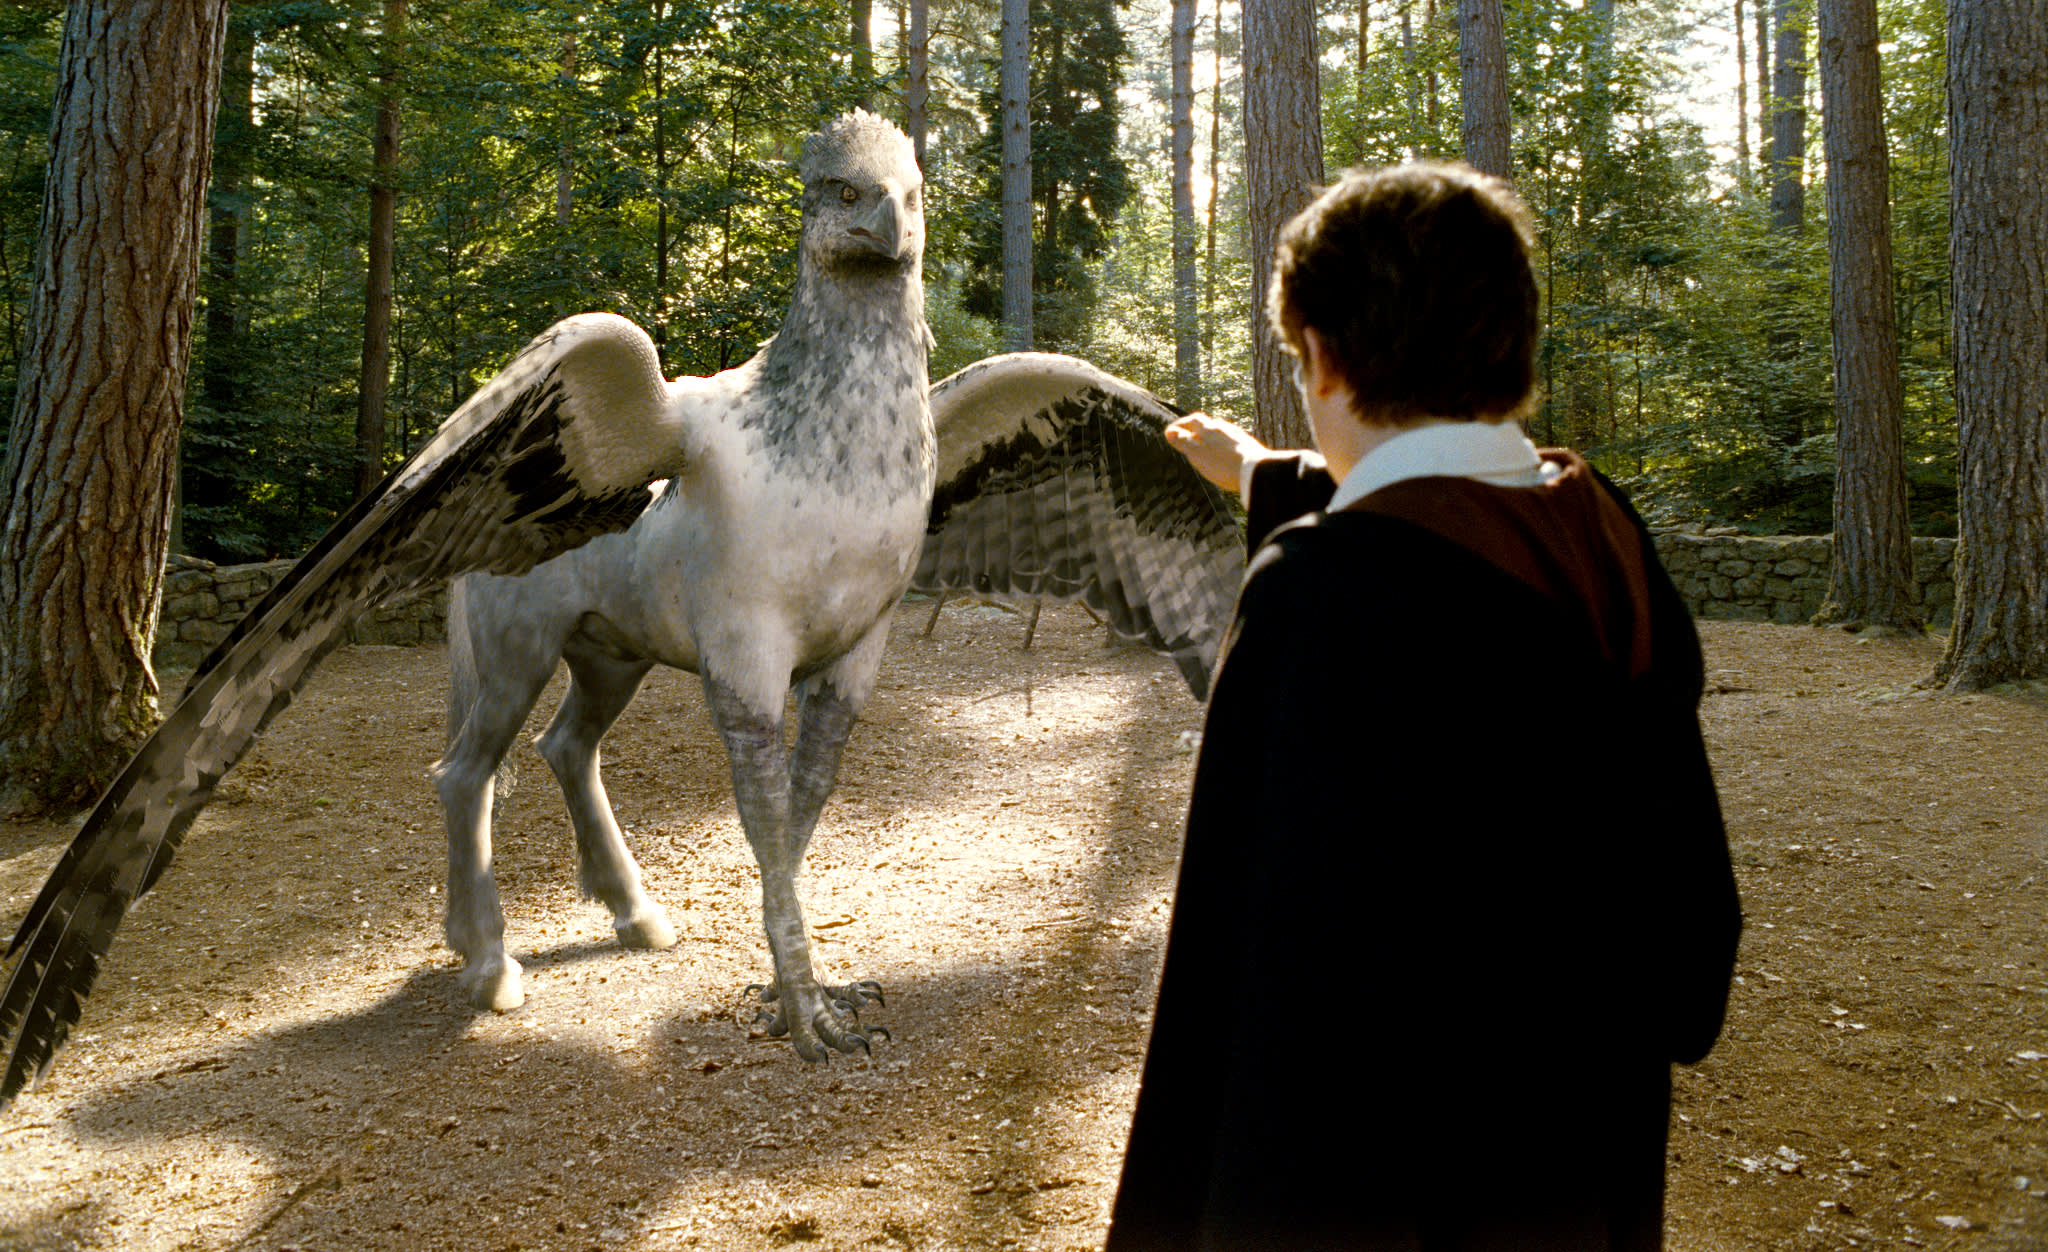 Harry is facing Buckbeak and reaching towards him during a Care of Magical Creatures lesson.